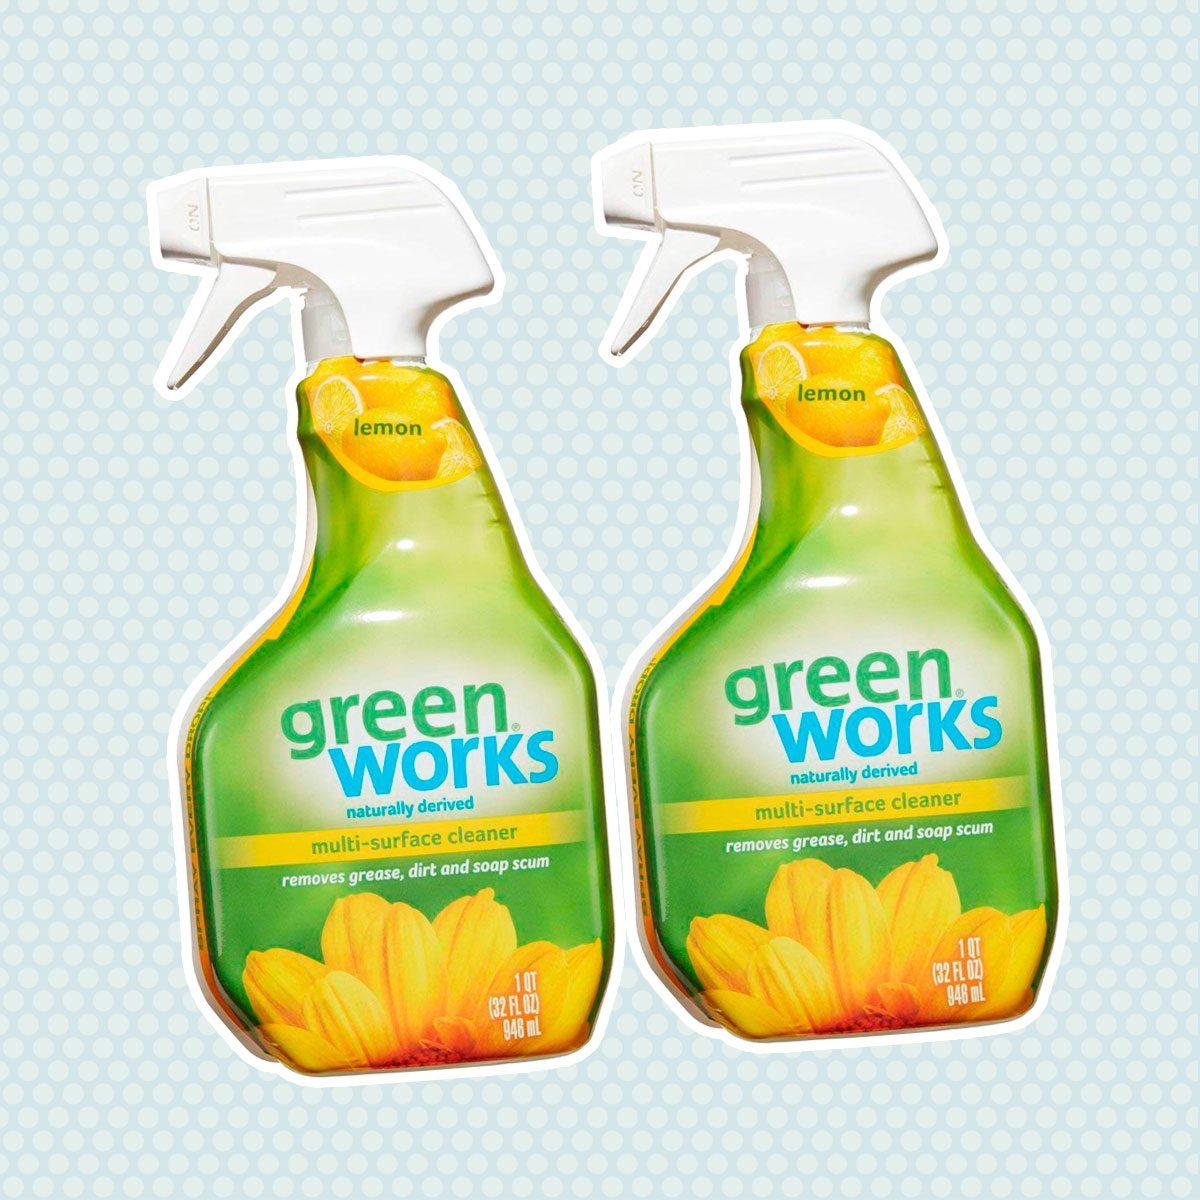 Greenworks 32 Fluid Ounces Liquid All-Purpose Cleaner in the All